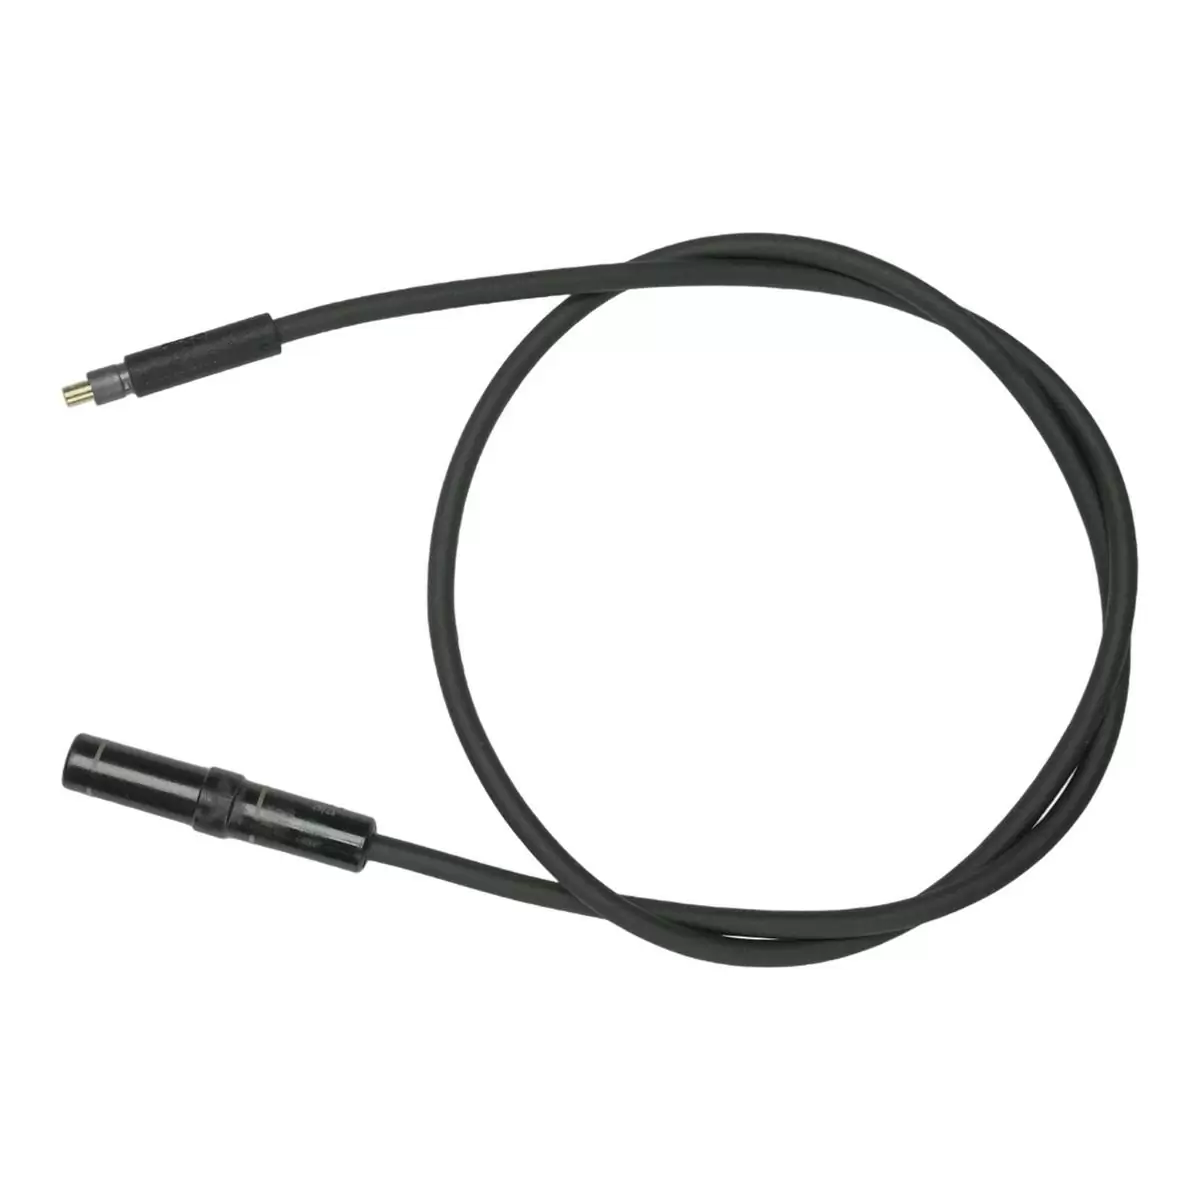 E-bike Speed Sensor Without Magnet For RIDE 60 550mm - image